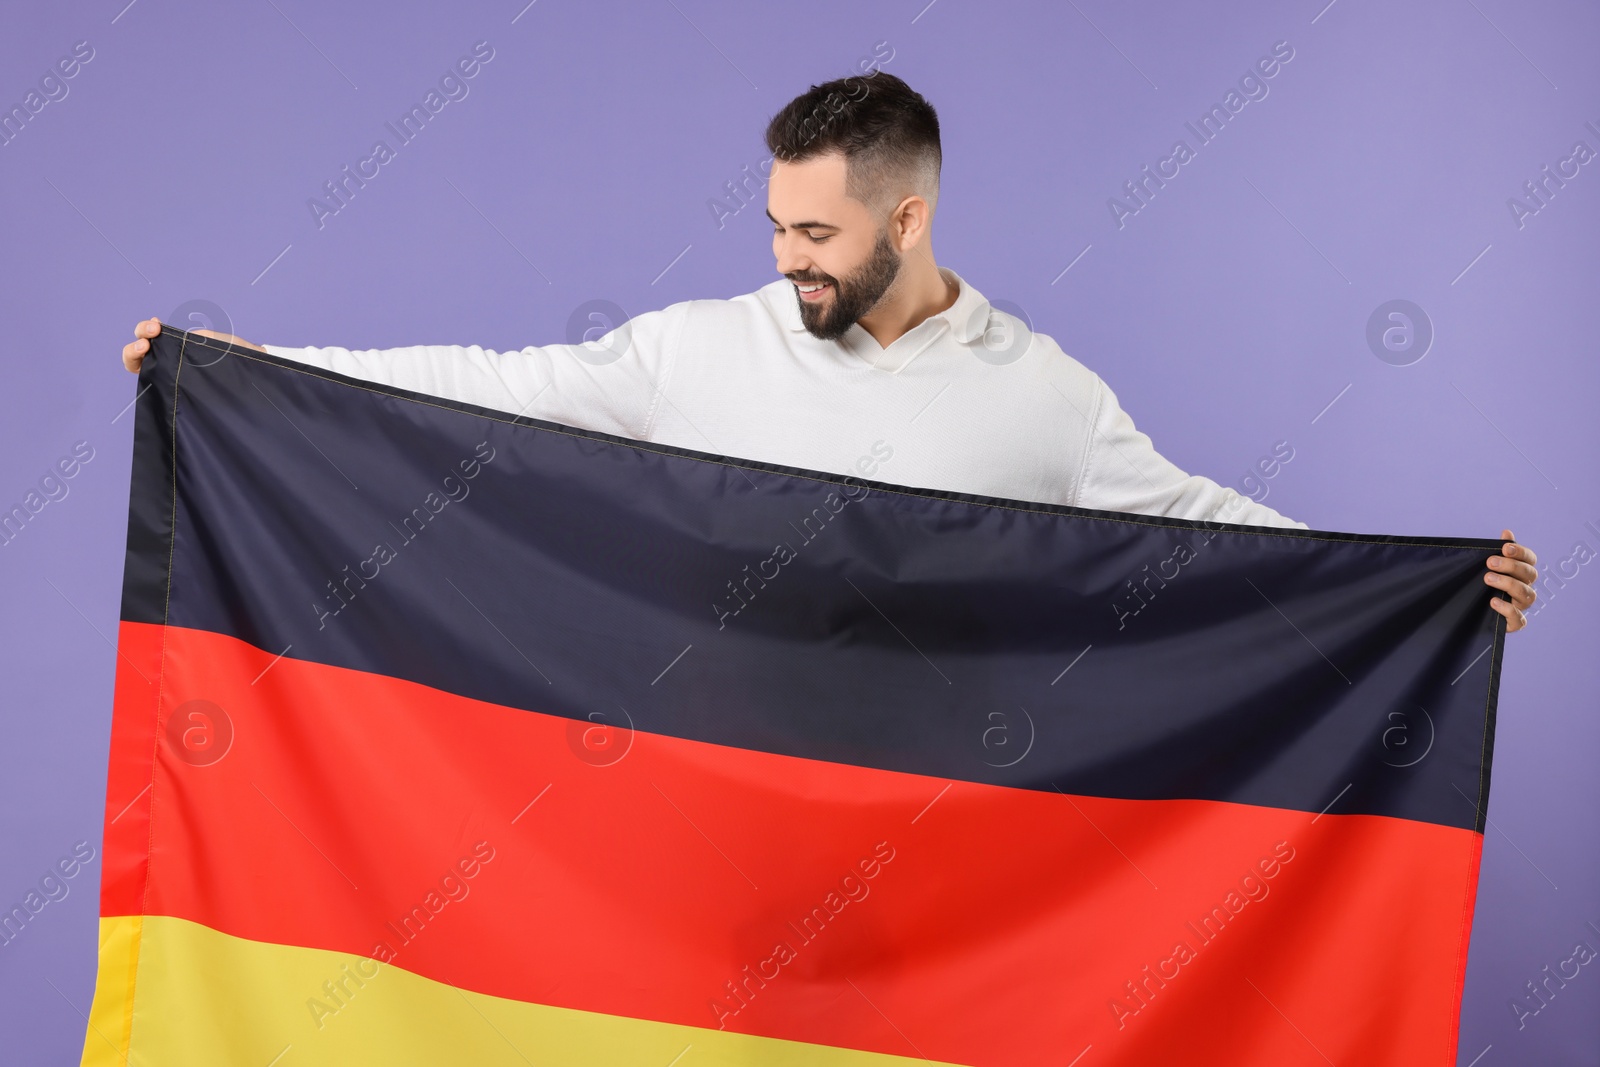 Photo of Young man holding flag of Germany on purple background